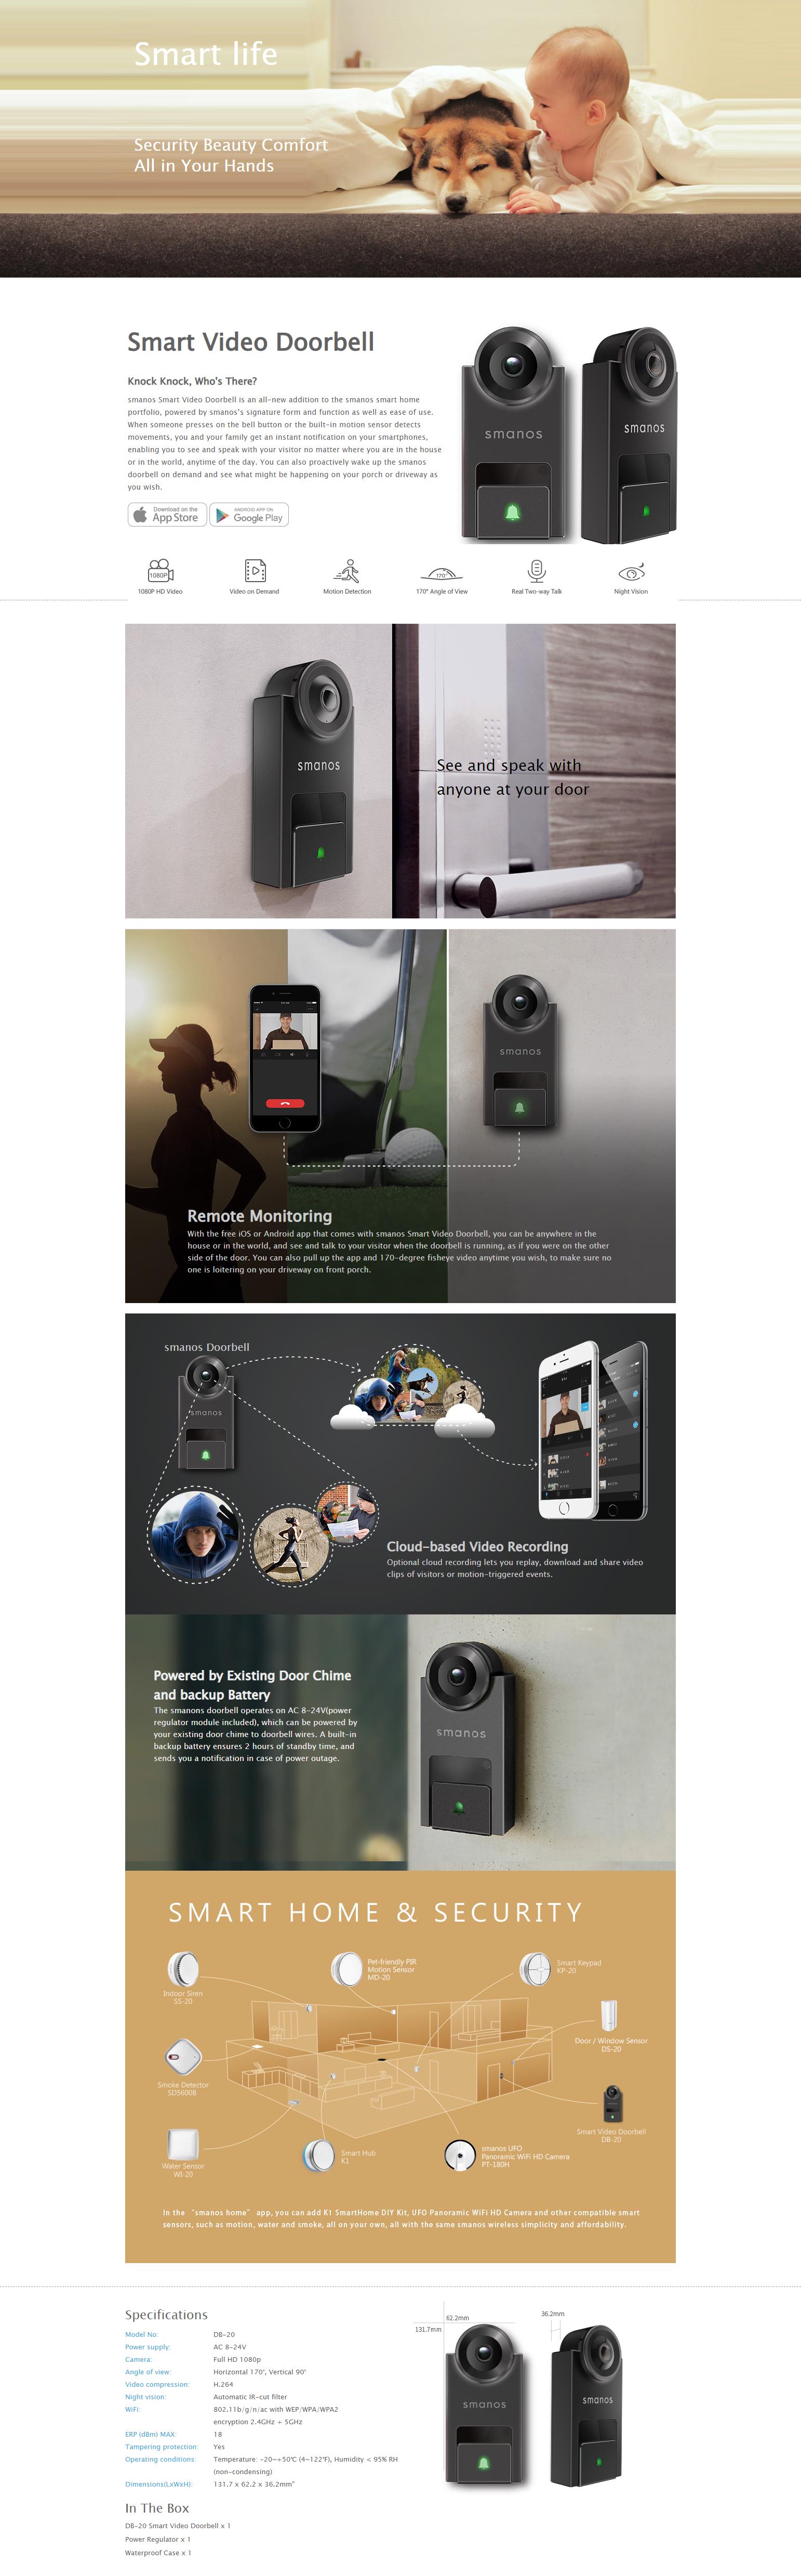 A large marketing image providing additional information about the product Smanos Smart Video Door Bell - Additional alt info not provided